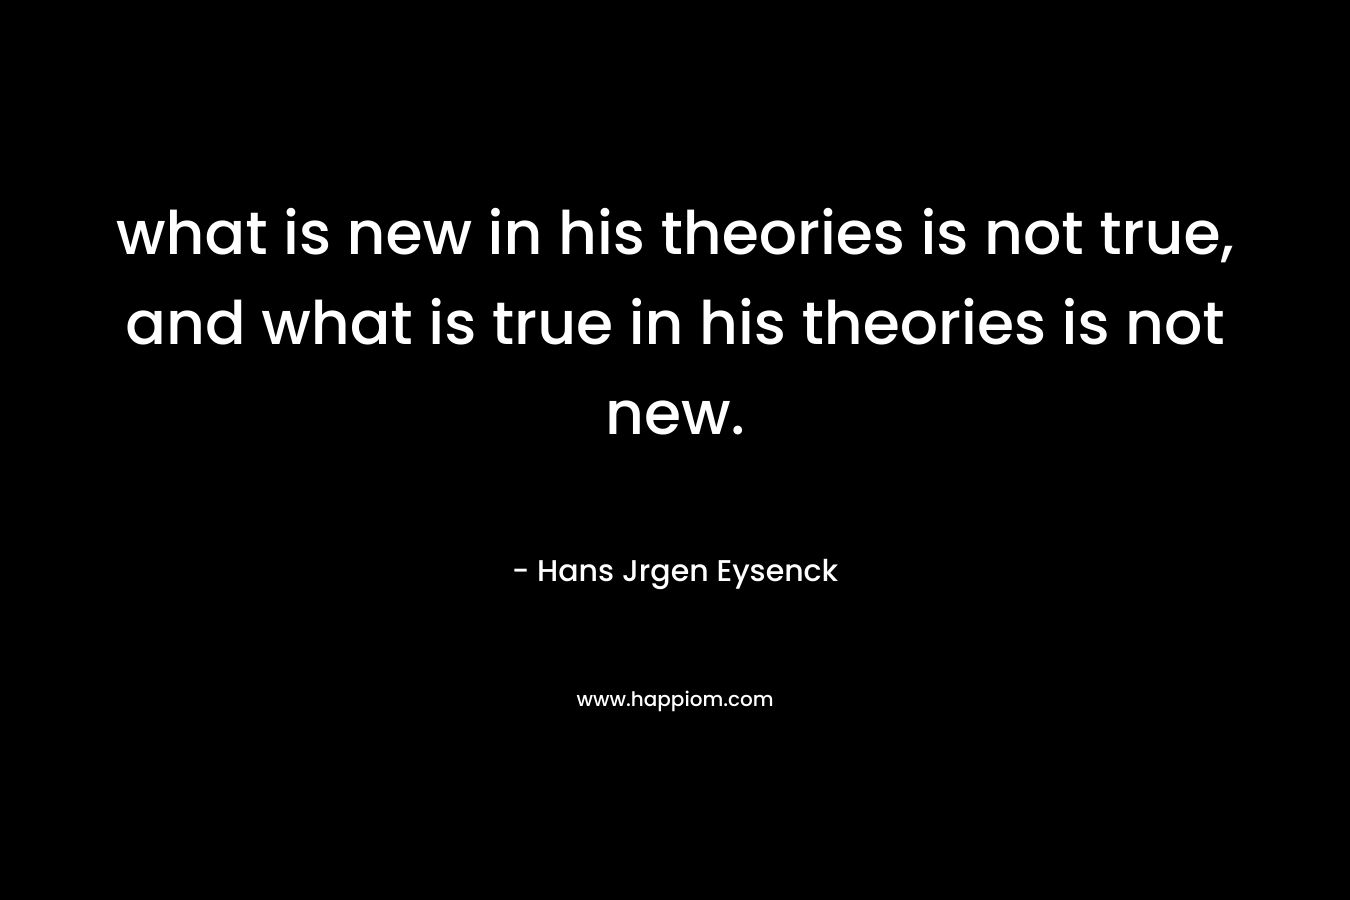 what is new in his theories is not true, and what is true in his theories is not new.